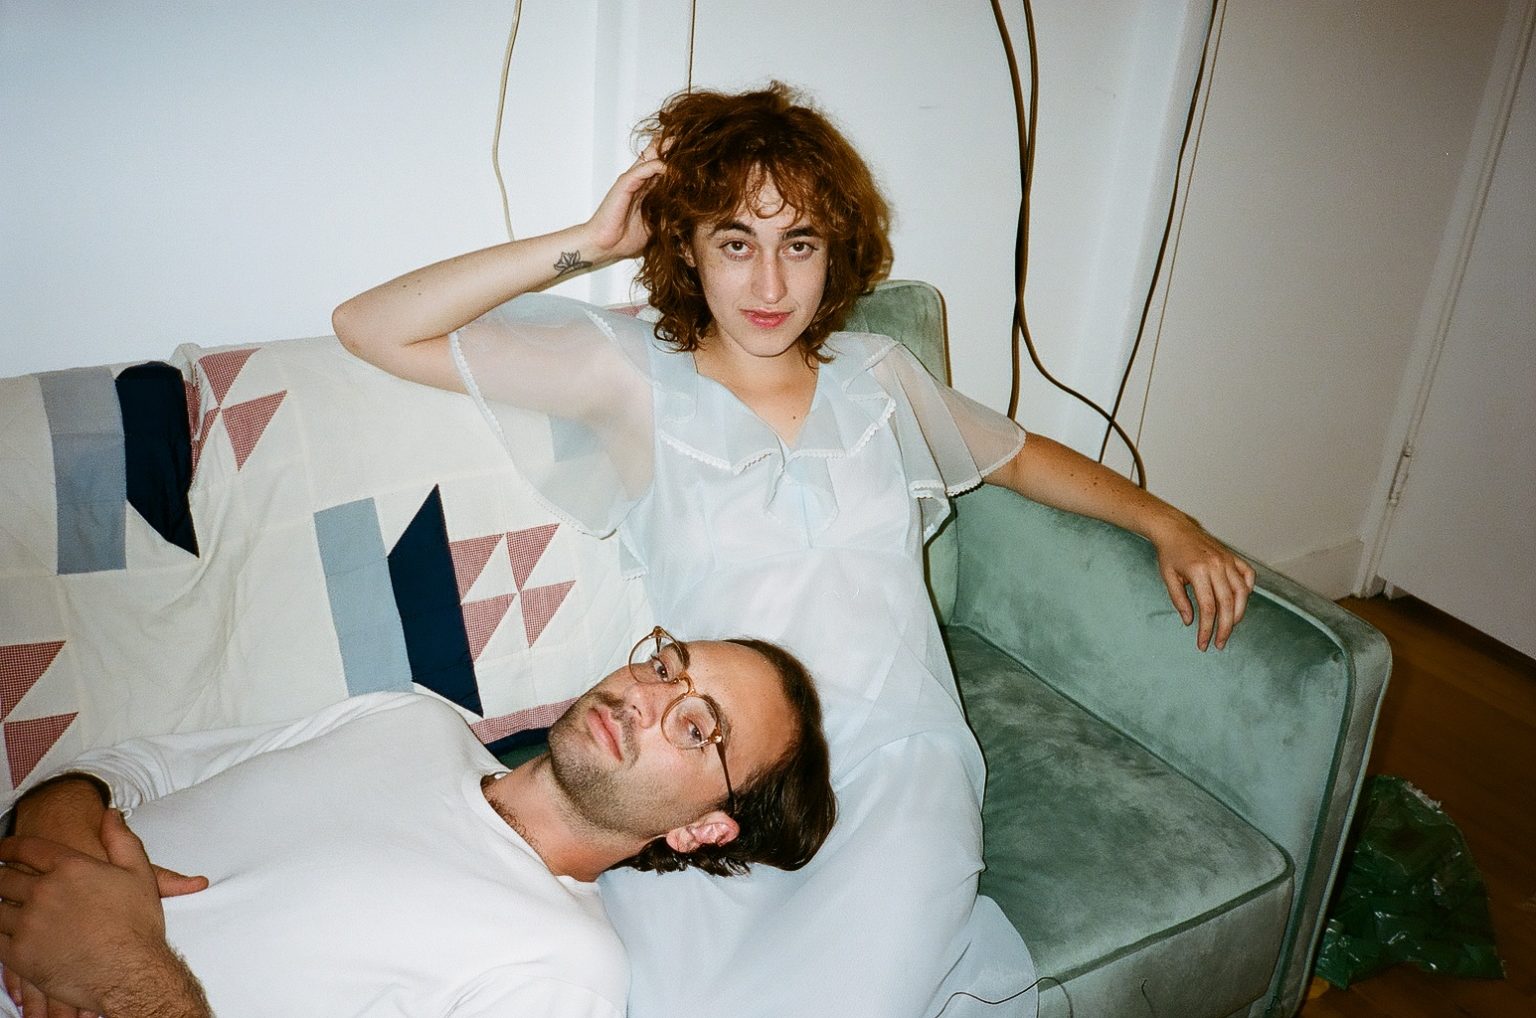 San Francisco's Harry the Nightgown is the creative duo of Spencer Harting and Sami Perez (bassist for Cherry Glazerr & The Shes), they met playing shows